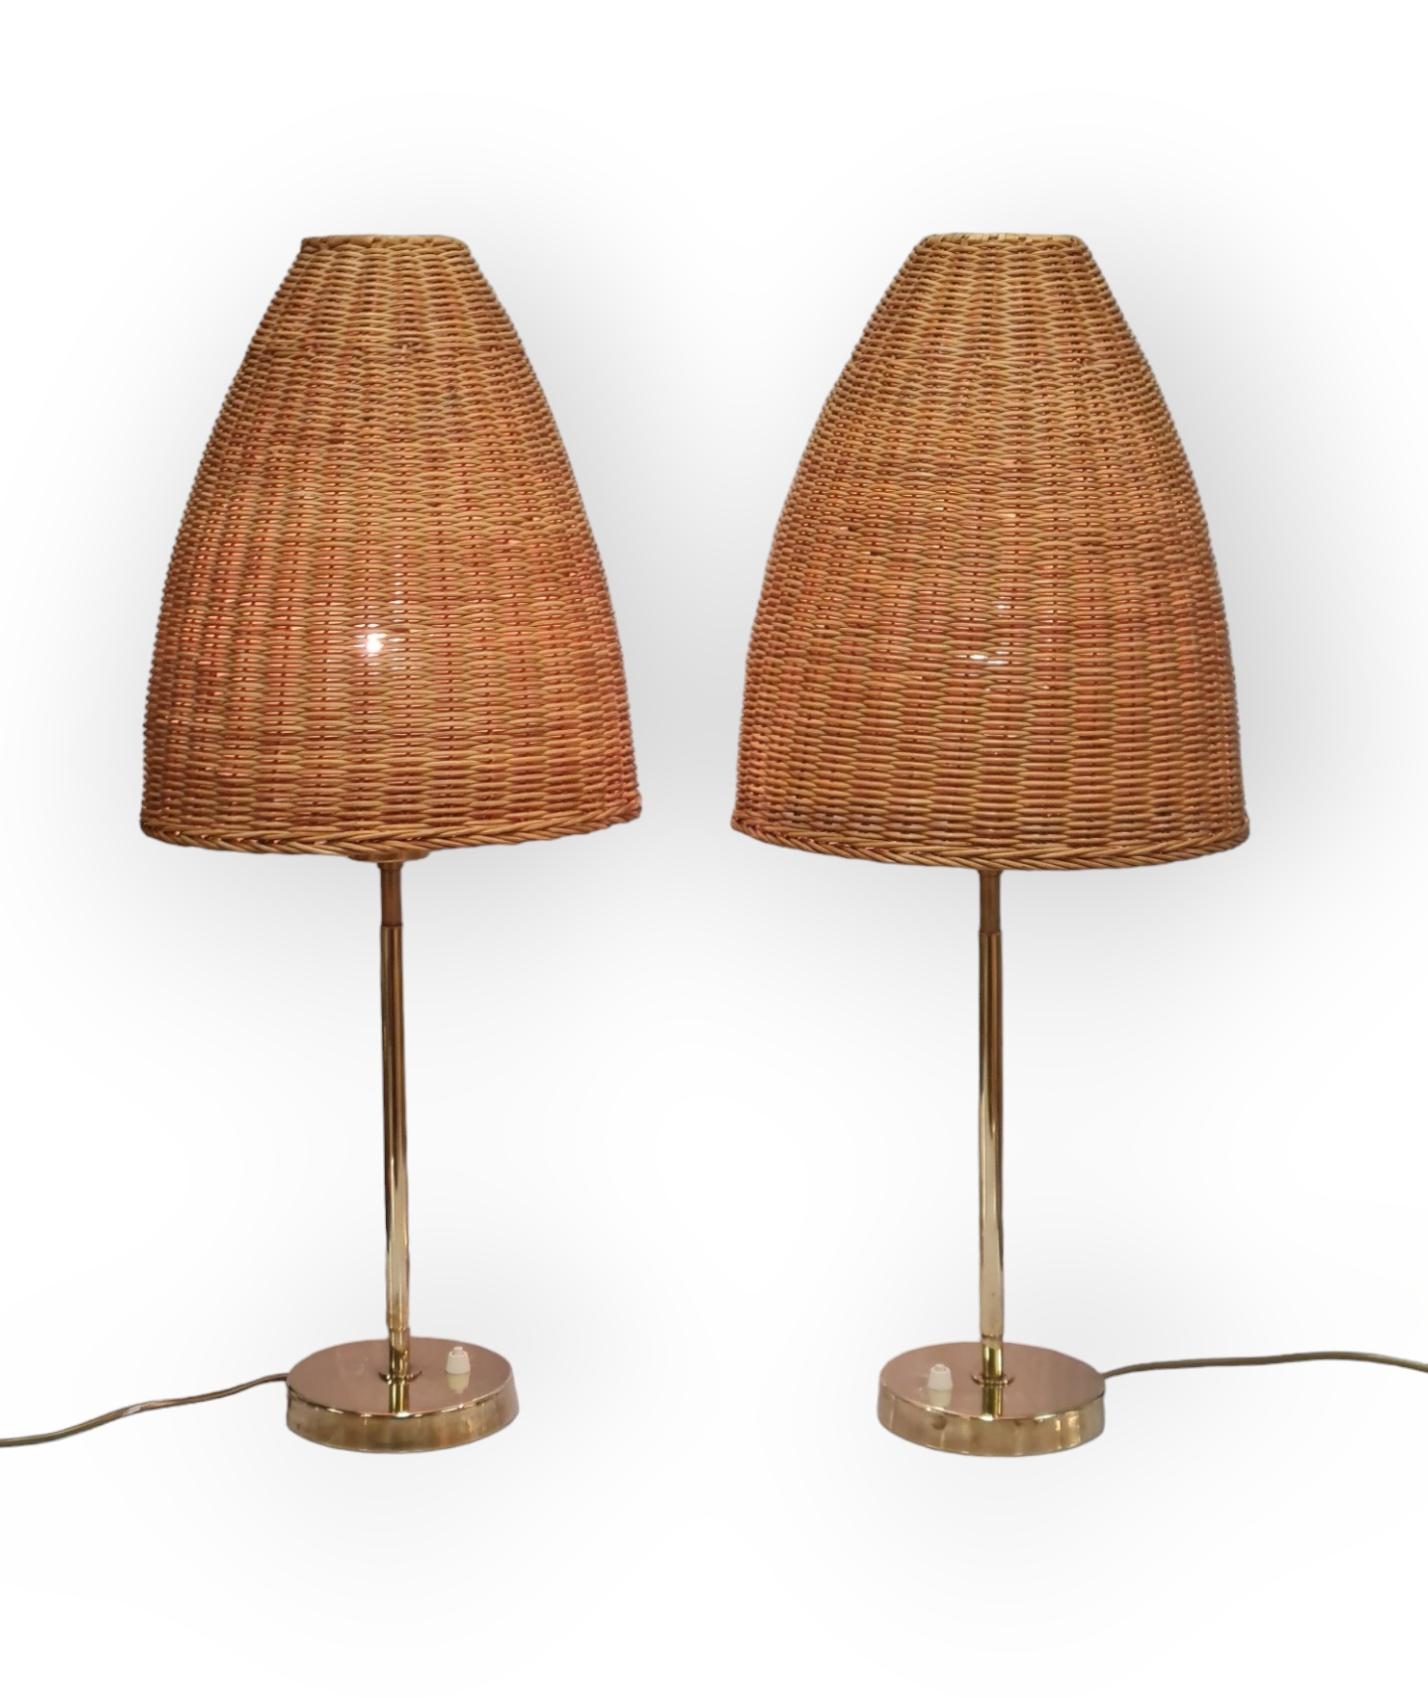 This pair of lamps you will not easliy find again, for it is extremely rare. 

Maija Heikinheimo (1908-1963) was an interior architect that started her career at Asko in 1932-1935. Later she joined the Artek team, and was Alvar Aalto´s right hand,